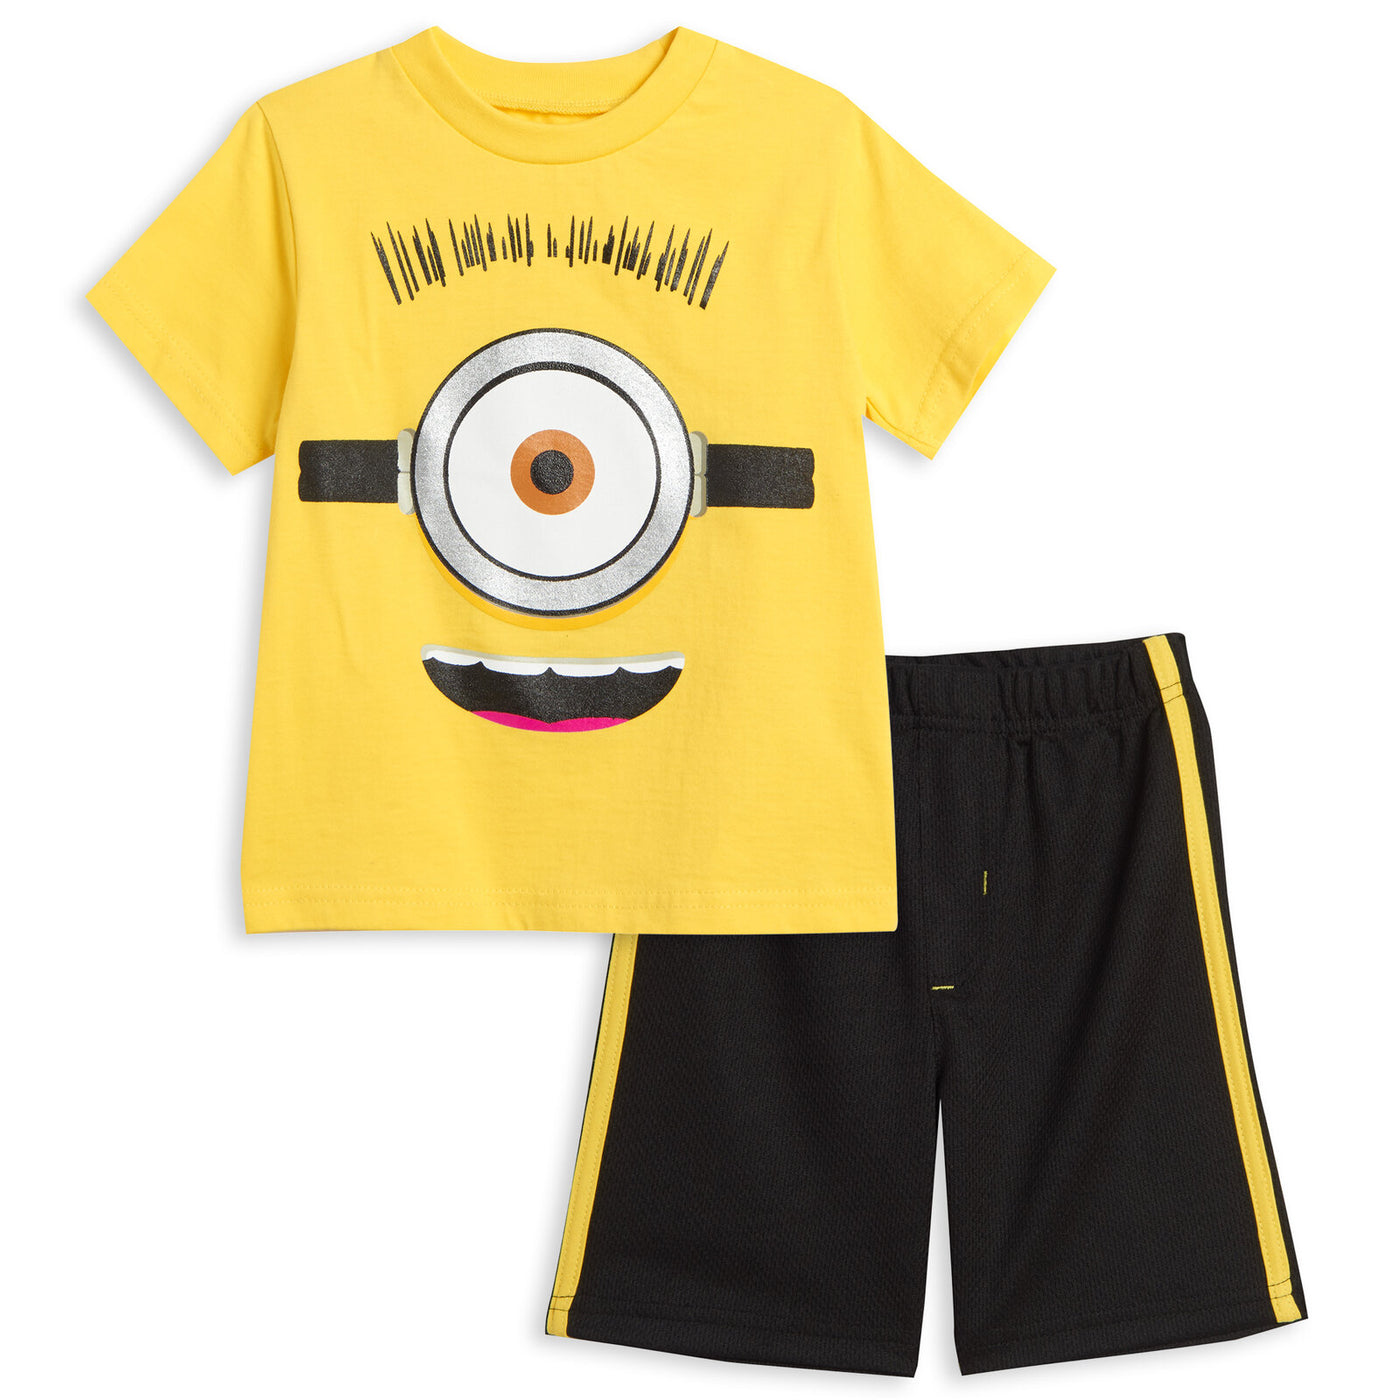 Despicable Me Minions T-Shirt and Shorts Outfit Set